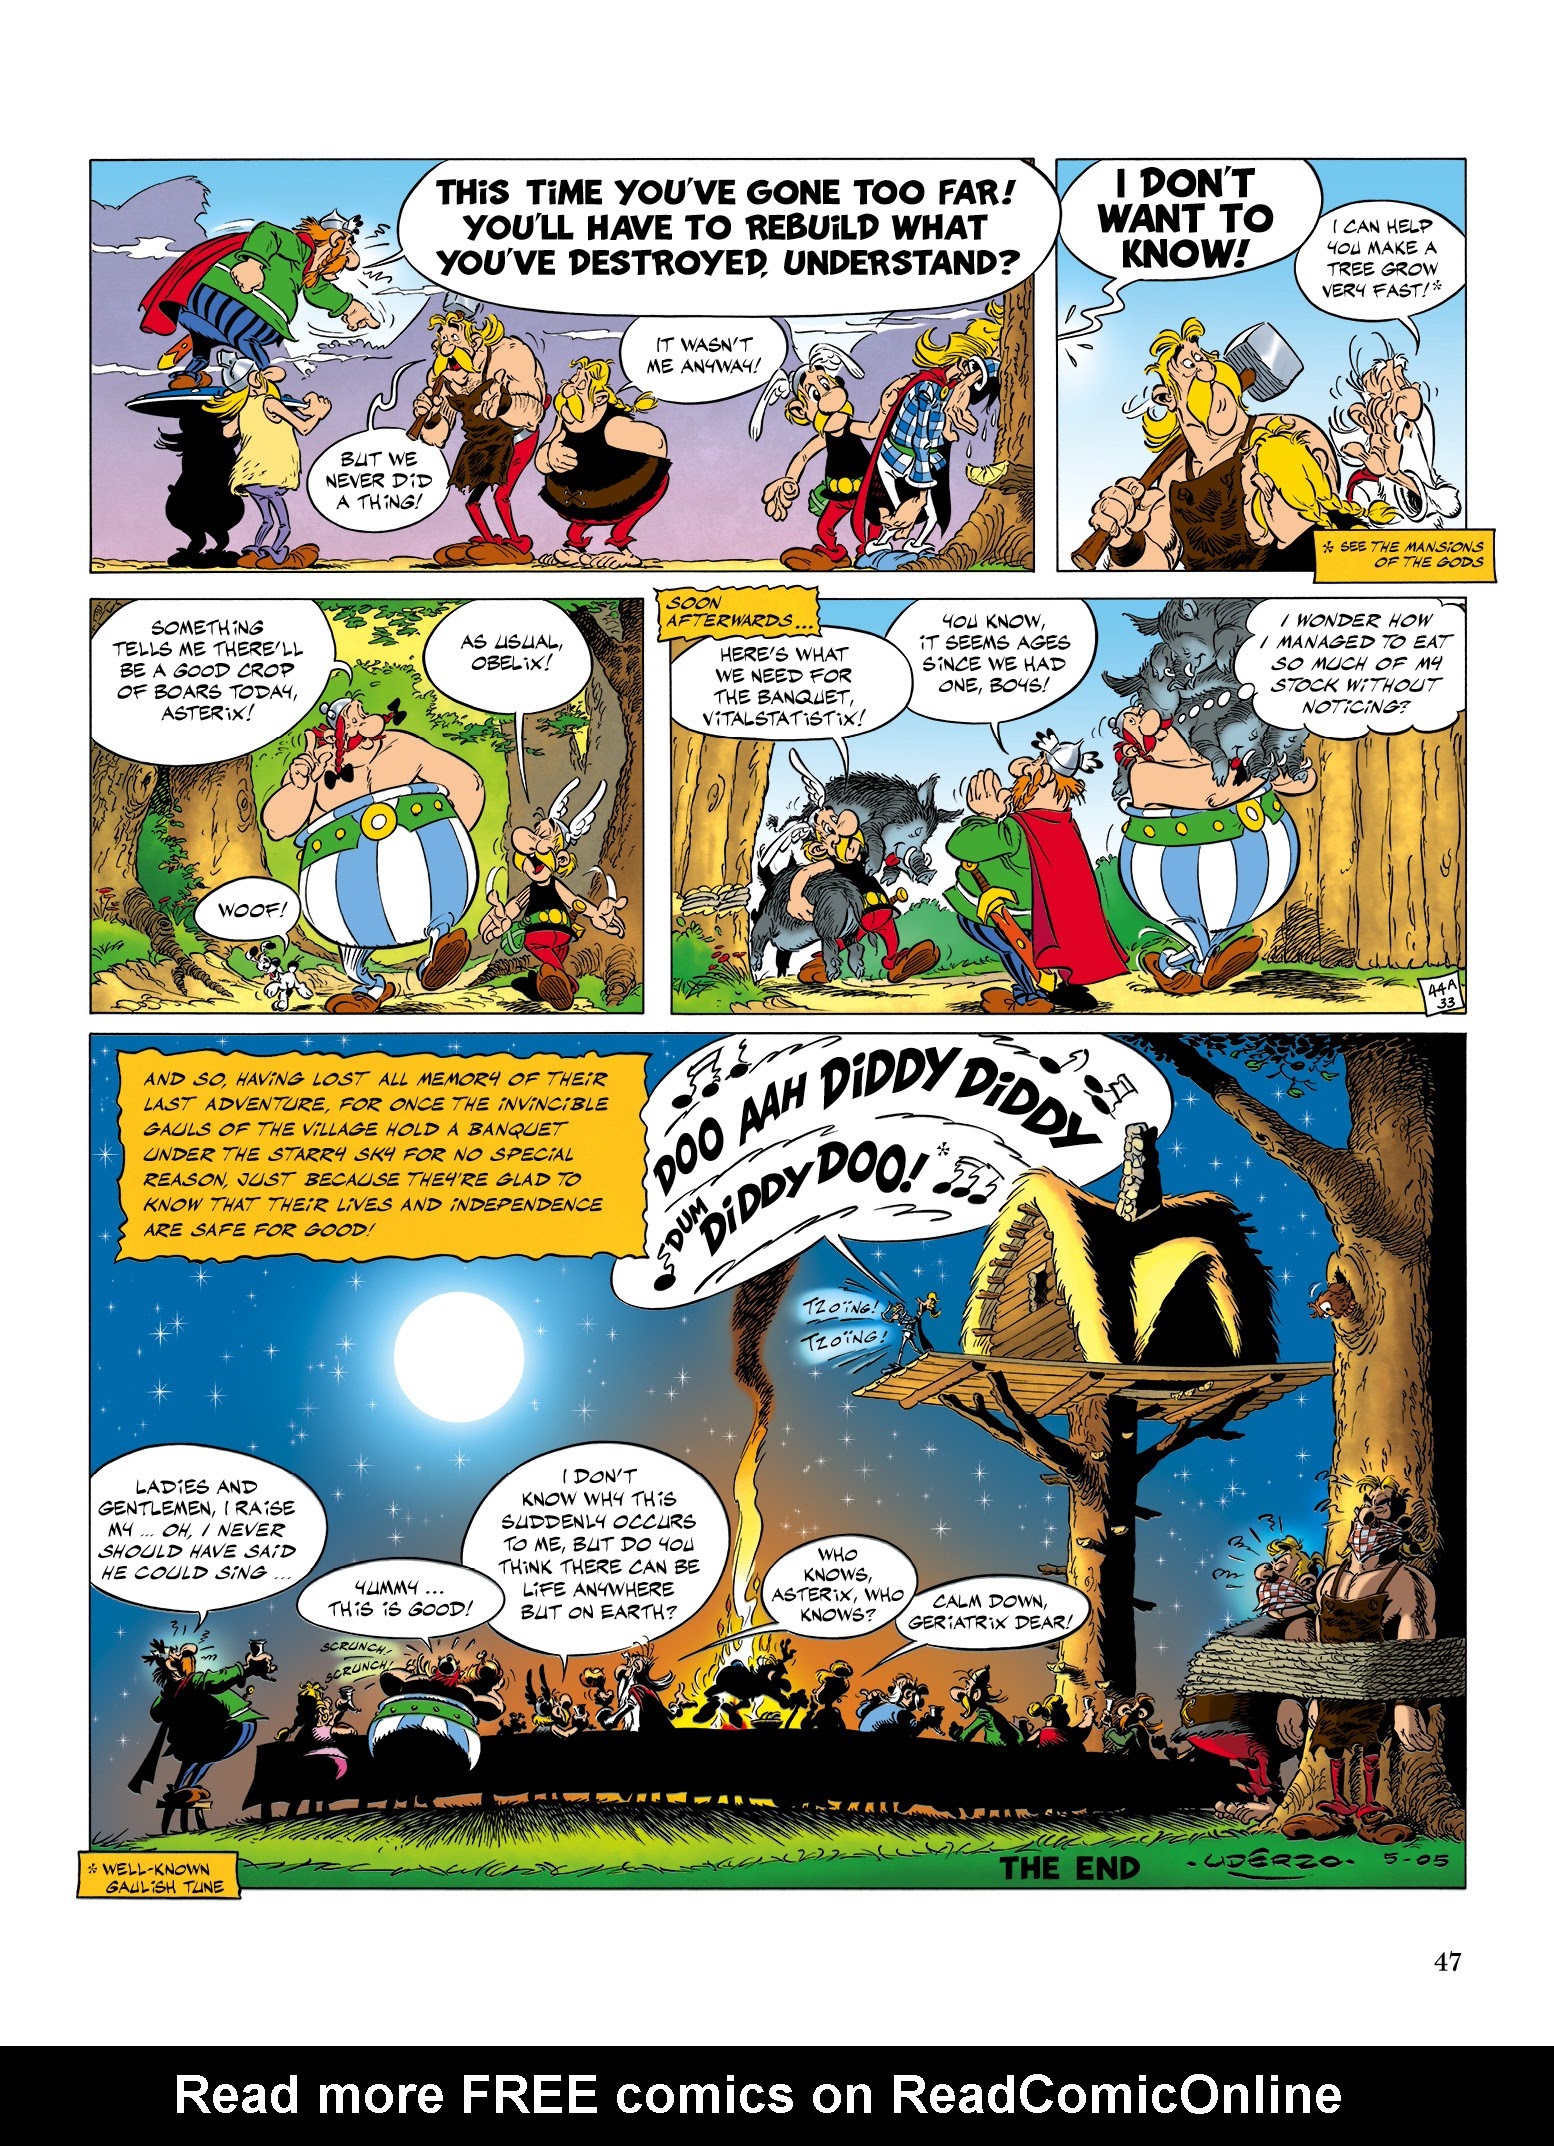 Read online Asterix comic -  Issue #33 - 48